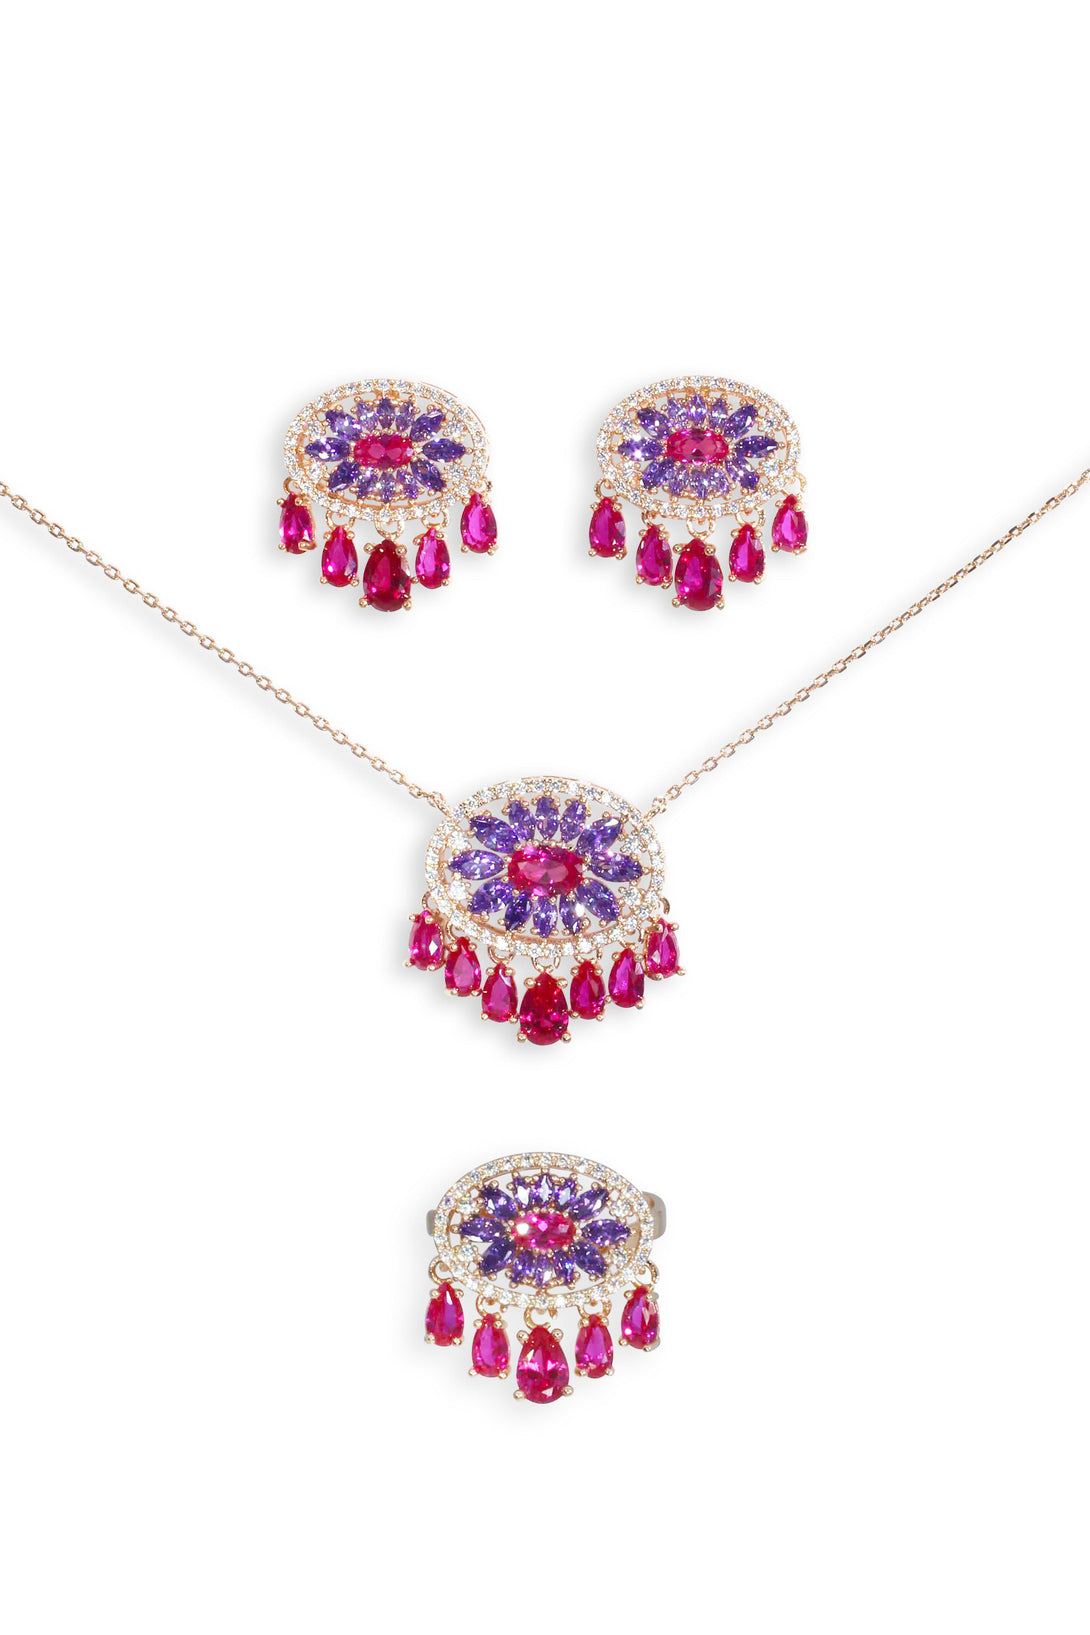 Sparkle Set Enhanced Fuchsia and Purple Crystal Abstract in Gold Plating (Earrings, Necklace, Ring)